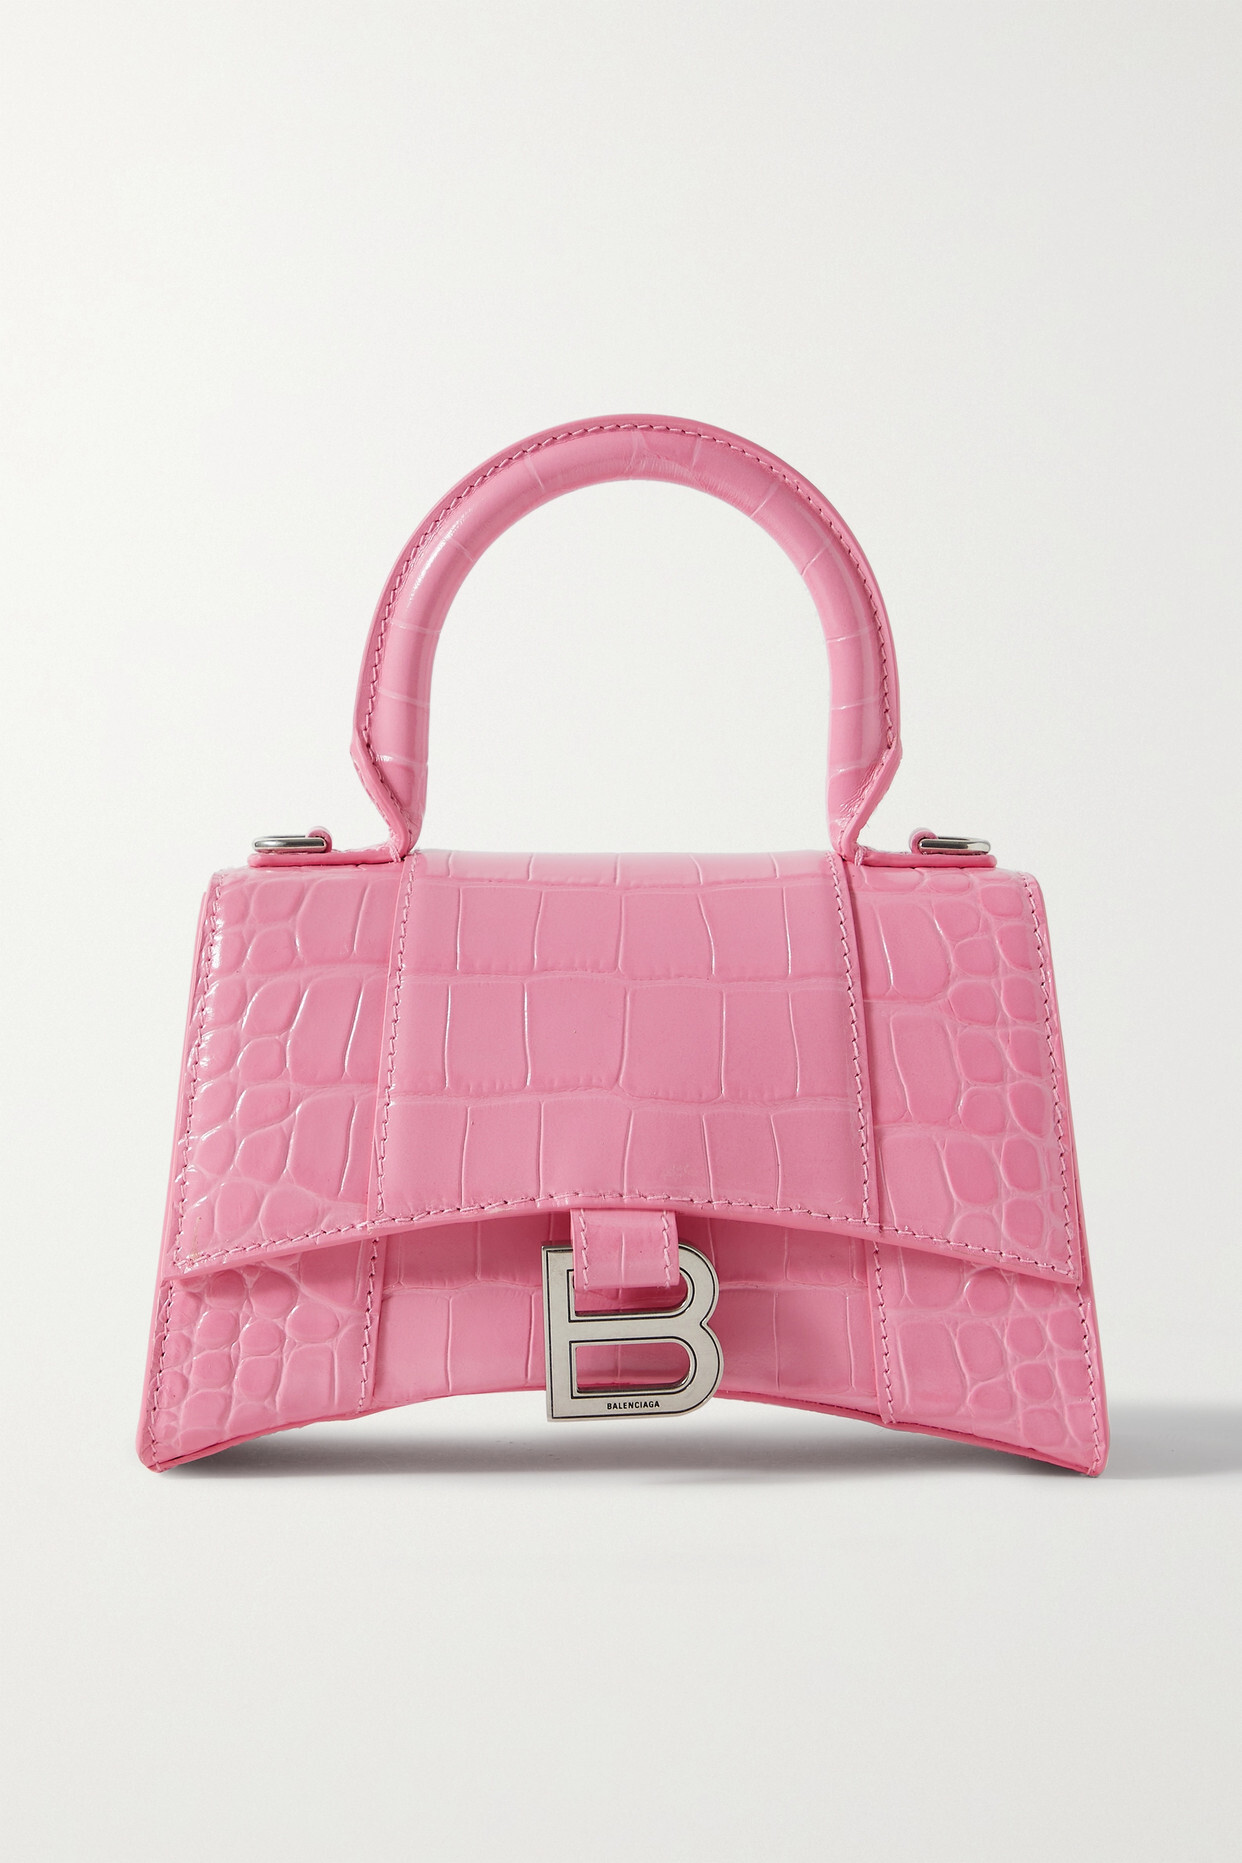 Balenciaga - Hourglass Xs Croc-effect Leather Tote - Pink